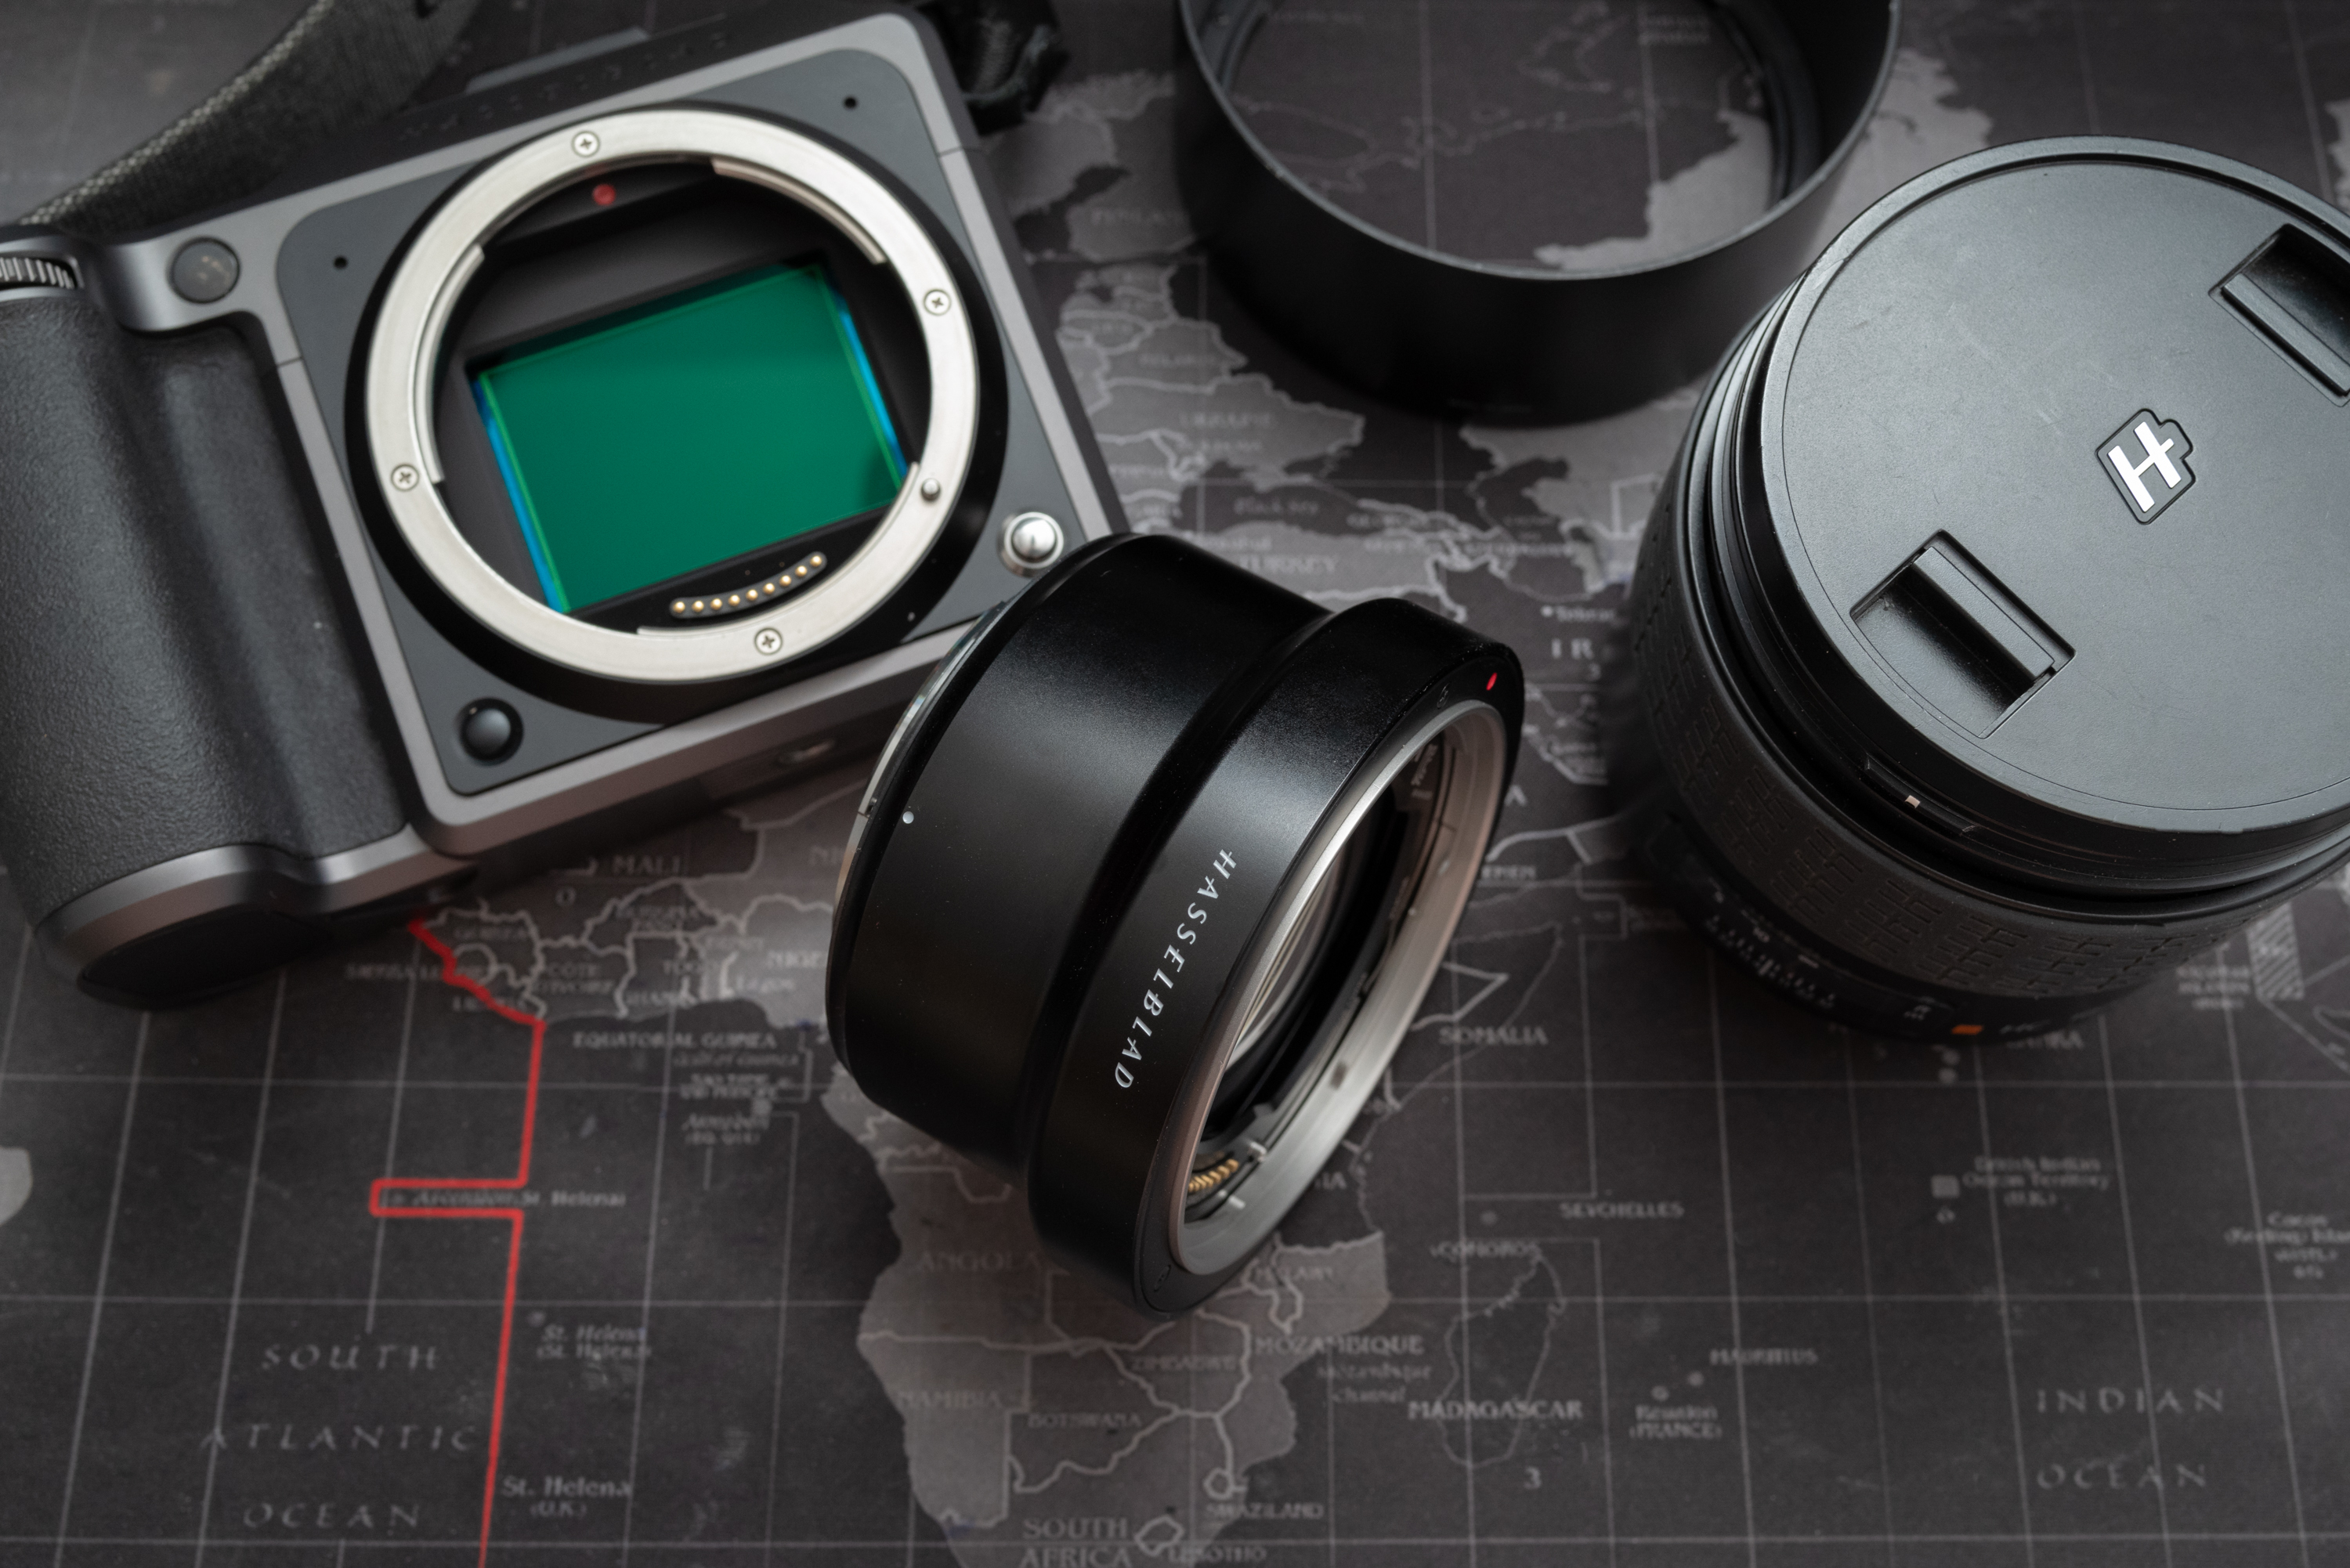 Big, Slow, and Pricey: Hasselblad XH Converter 0.8 Review